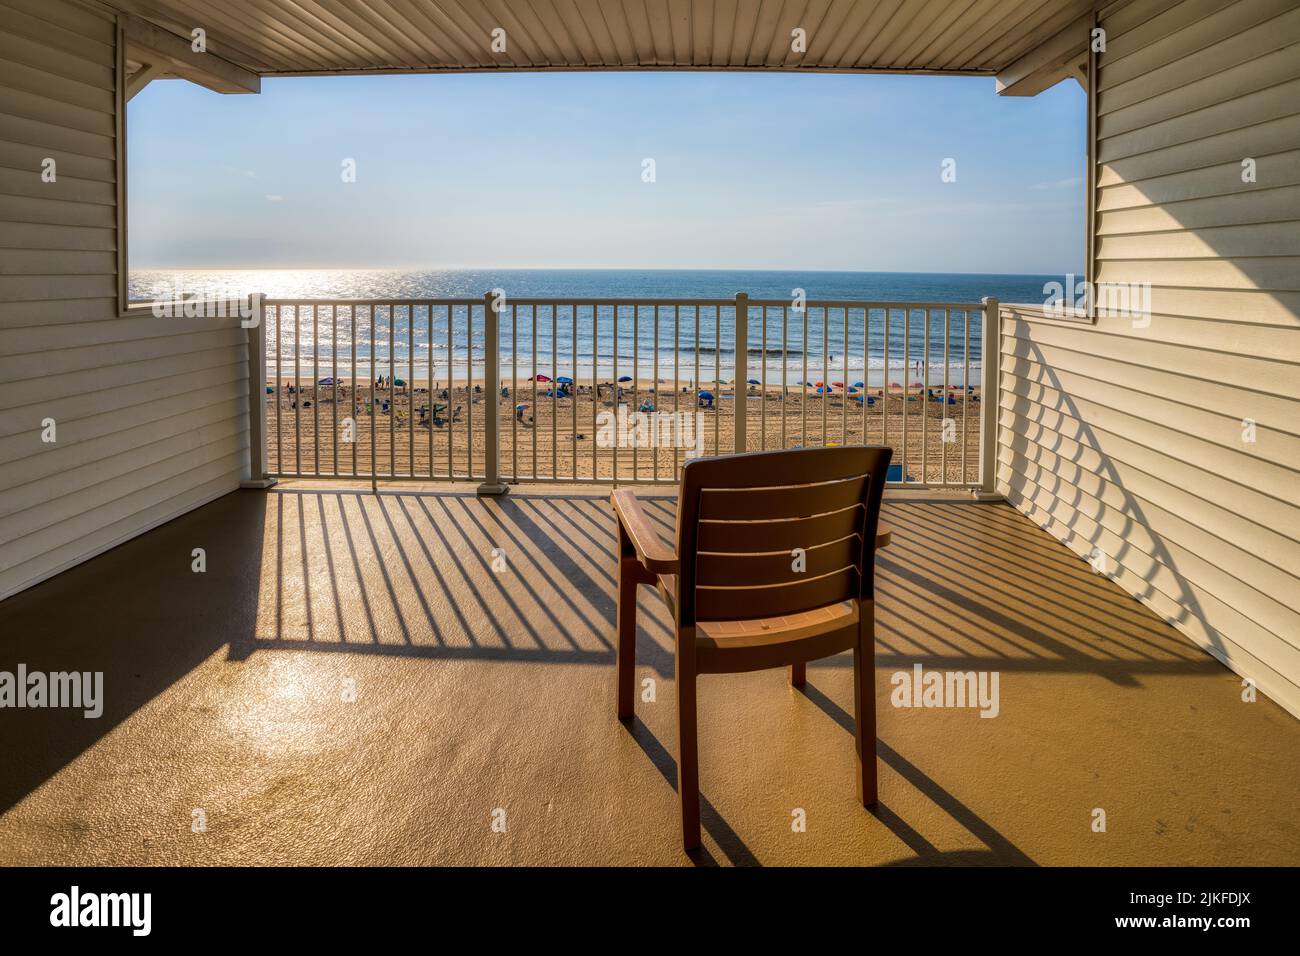 A beautiful shot of a wooden chair on a porch against a sea on a sunny day Stock Photo